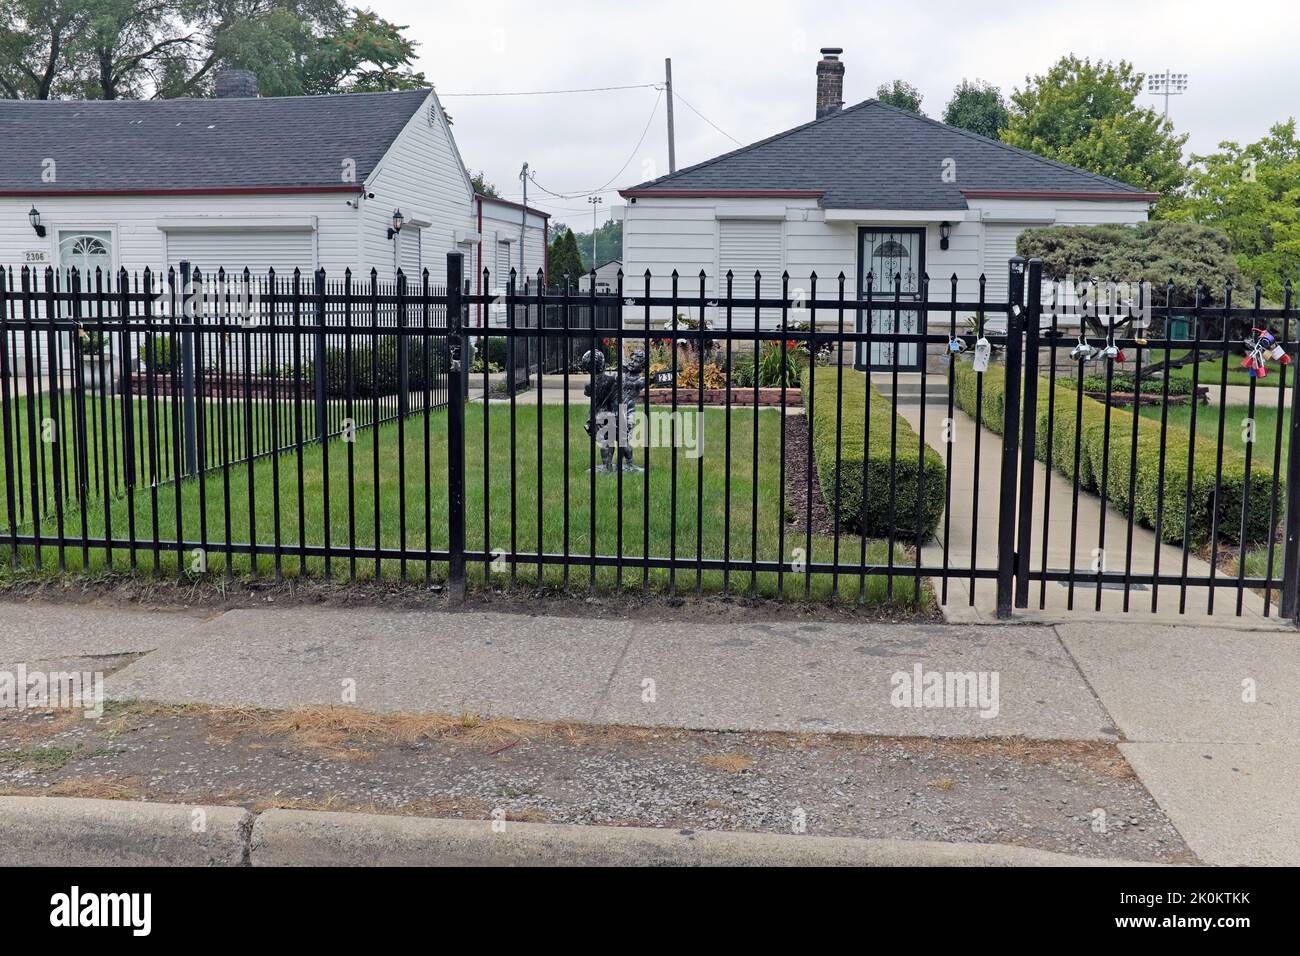 The childhood bungalow home of Michael Jackson at 2300 Jackson Street in Gary, Indiana has become a place of homage for the late singer. Stock Photo